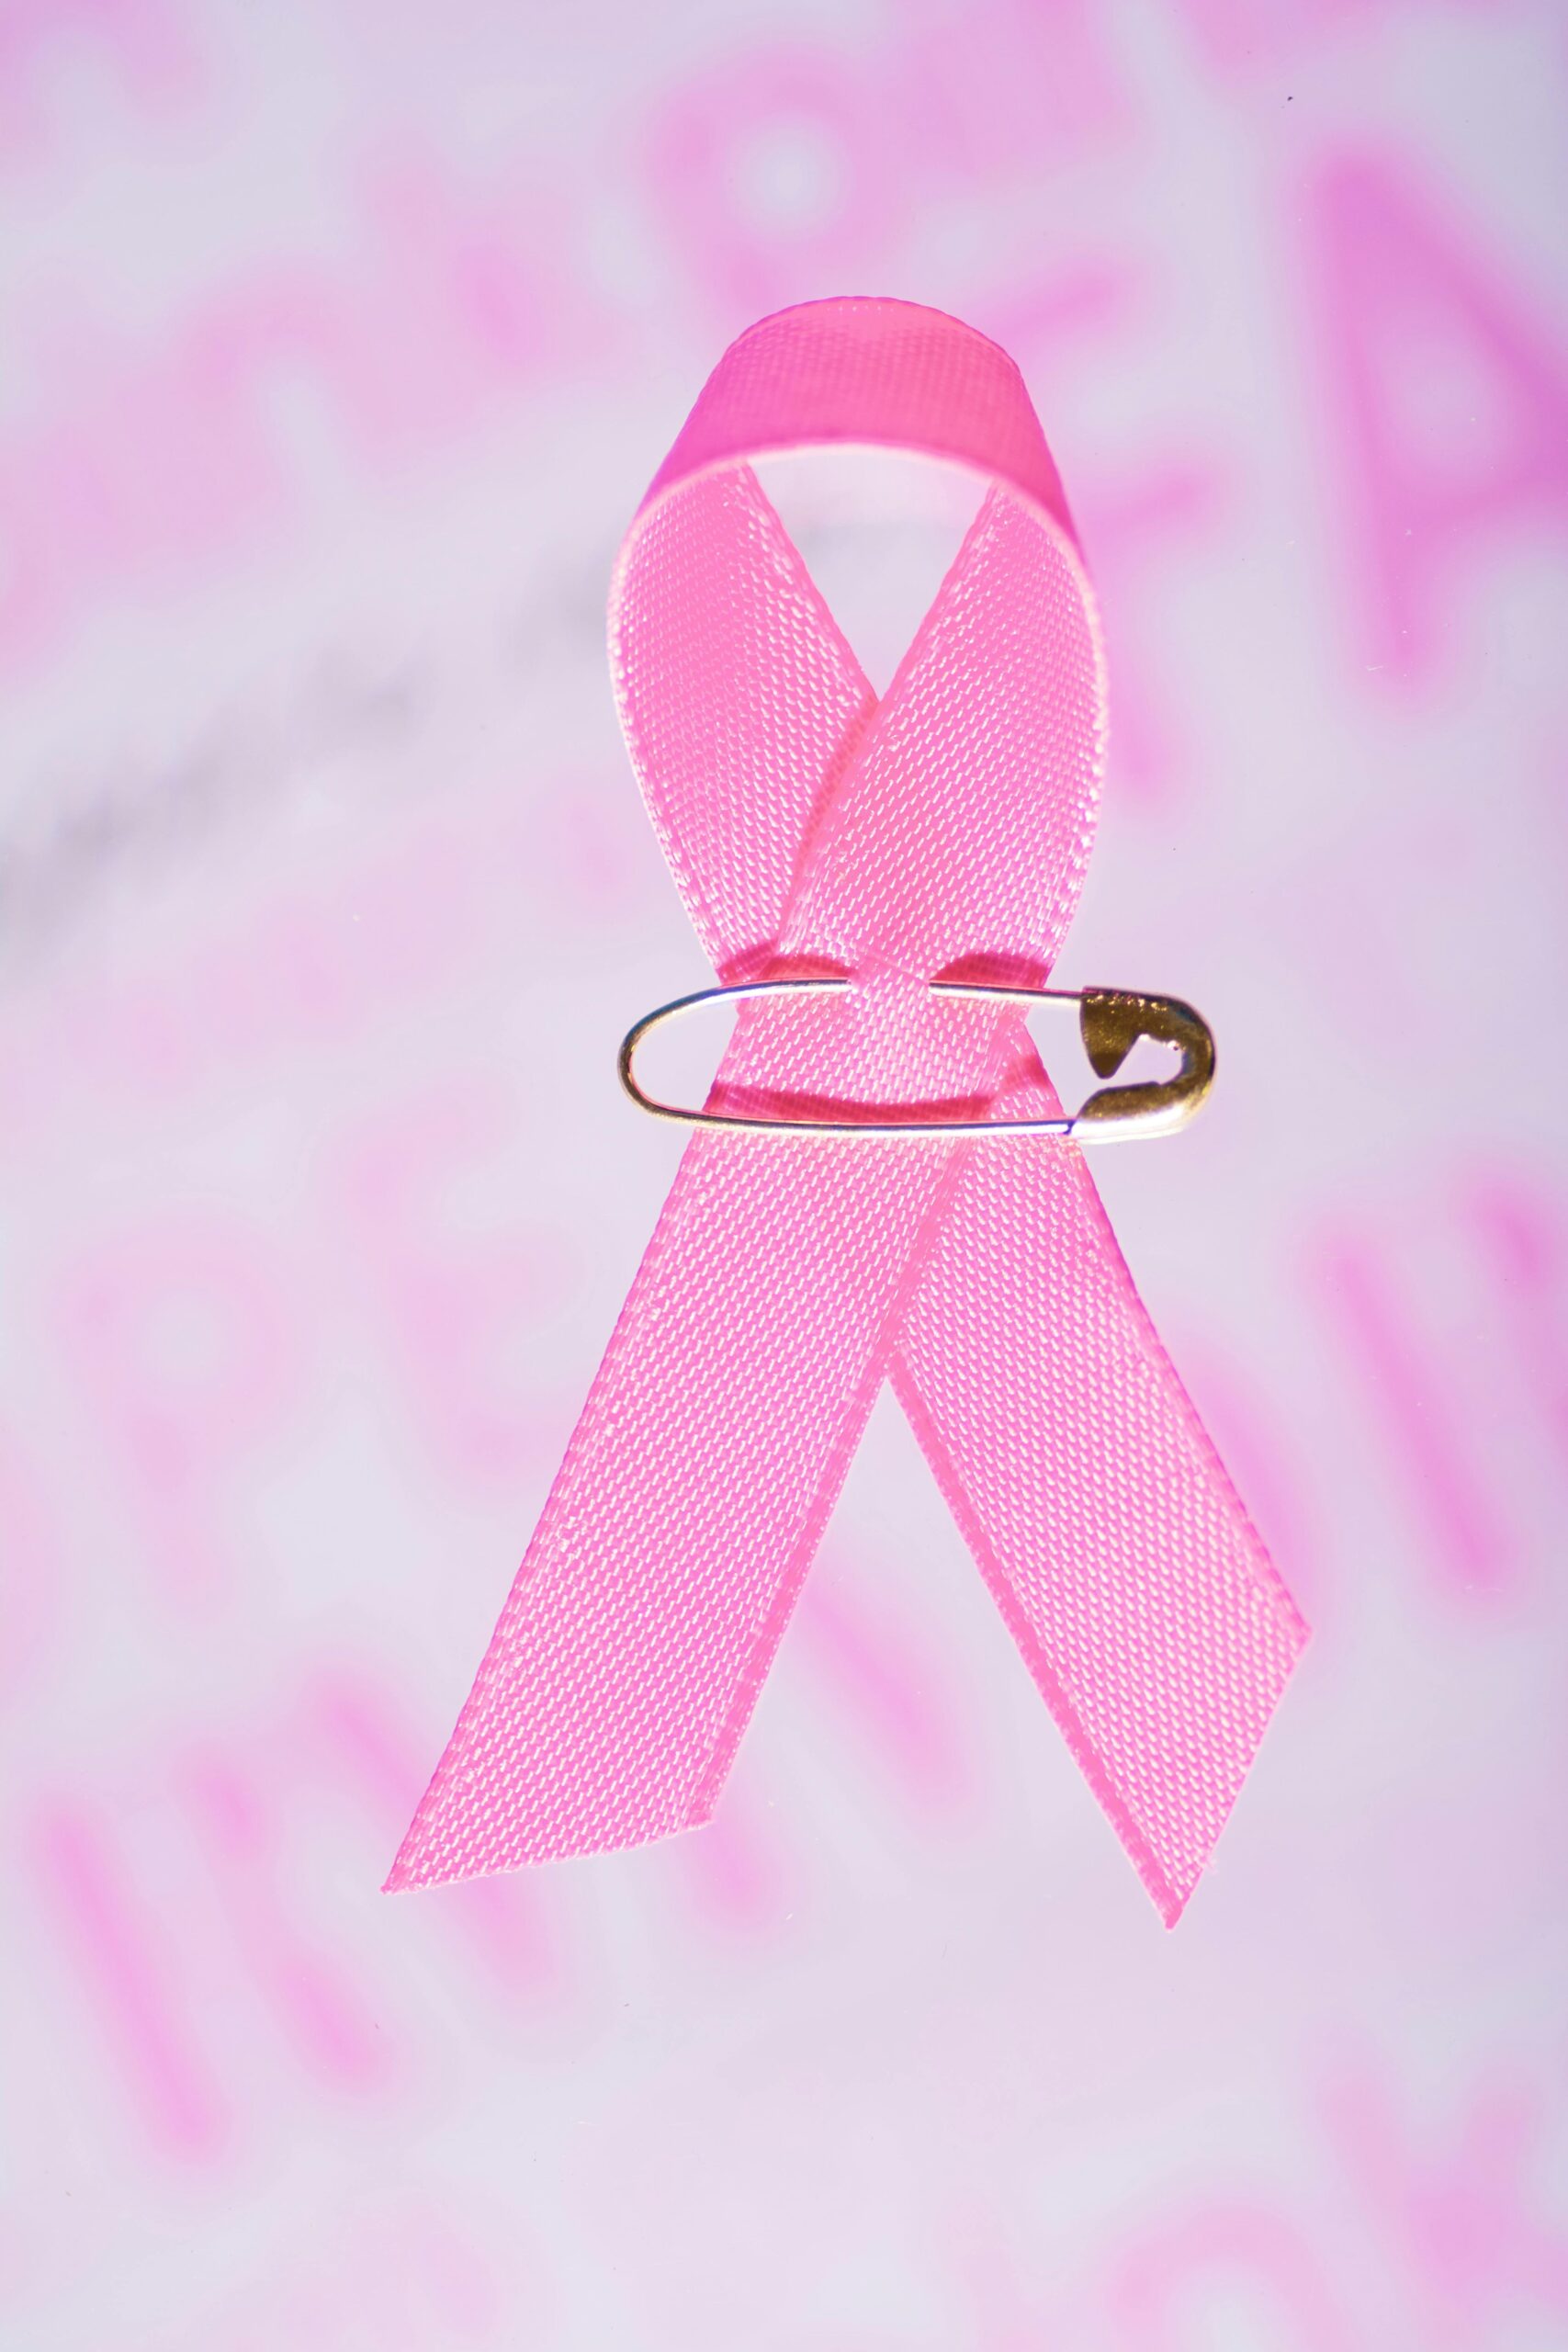 SSDI Benefits for Breast Cancer